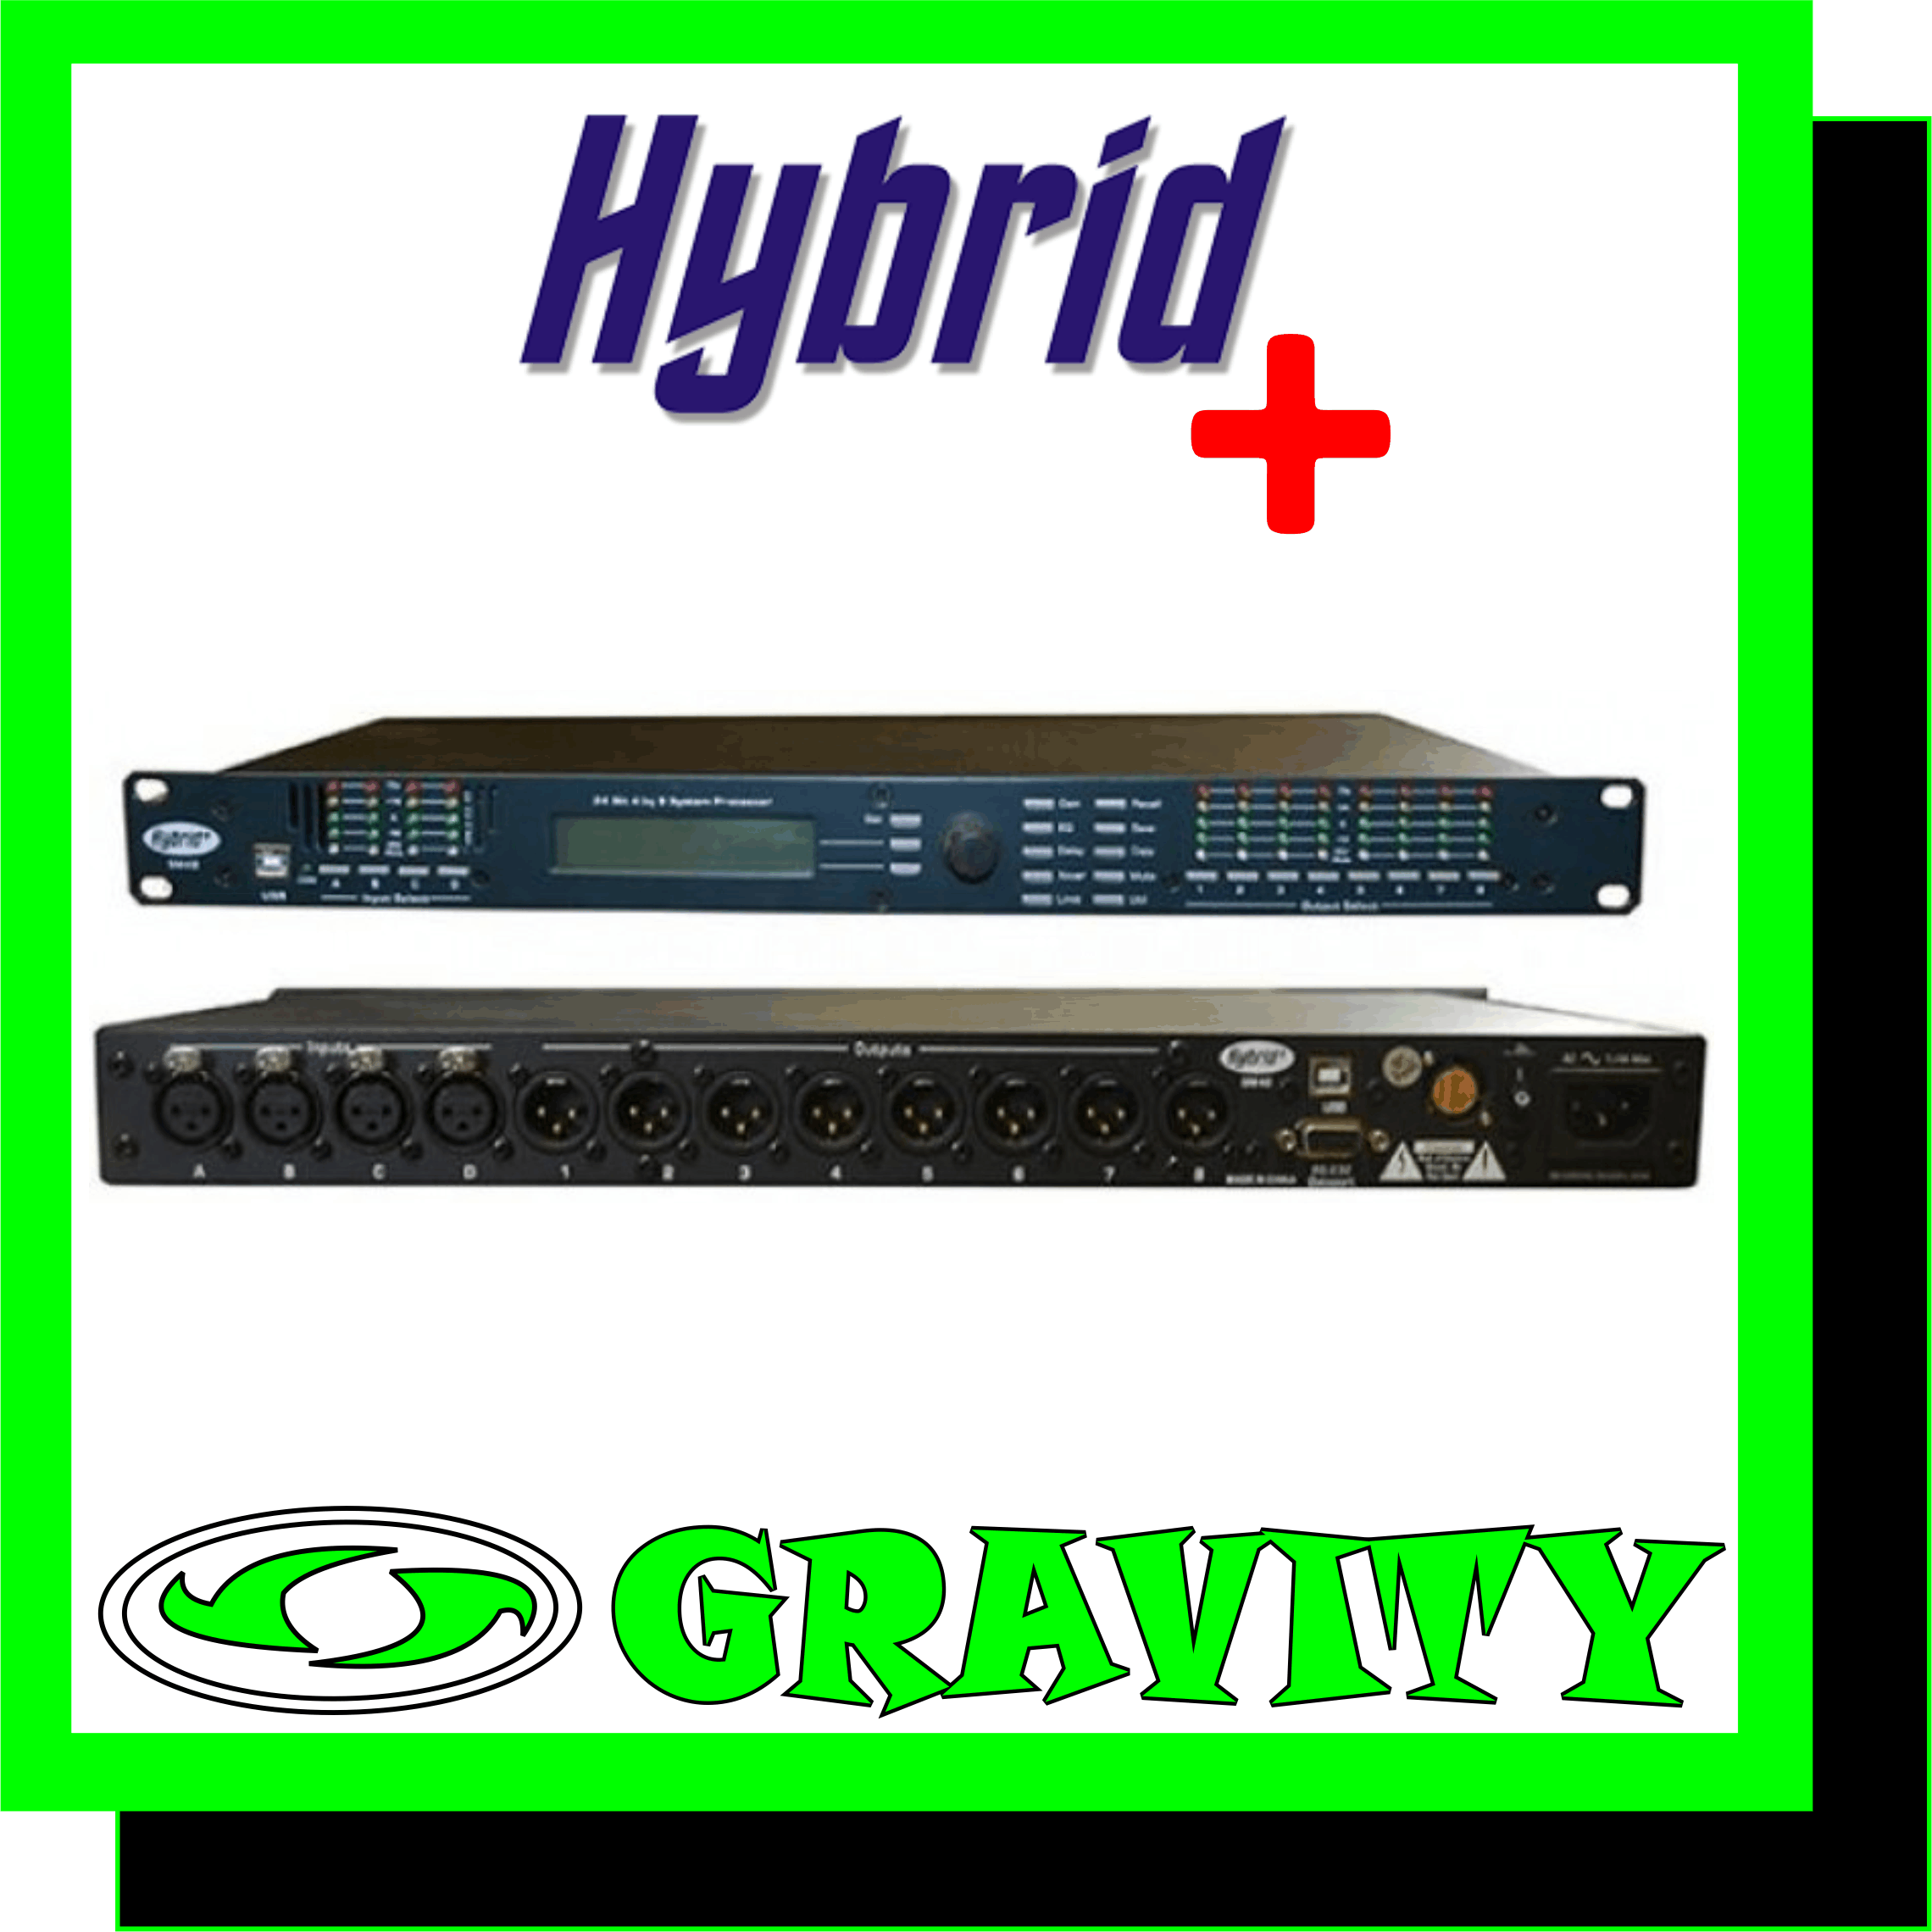 Hybrid+ SM48 4 in 8 out Speaker Management  4-In, 8-Out Digital Speaker Management System/Processor Outputs: LPF / HPF Crossovers, 12-48dB/Oct 8 x PEQ / Low-Shelf / High Shelf Filters Time Alignment: 0-7 Meter Gain & Polarity Control Compressor / Limiter Inputs: Delay: 0-35 Meter9 x PEQ / Low Shelf / High Shelf FiltersGain Control* PC (USB) or On-Board Control* Password Protected* Save up to 30 User Presets